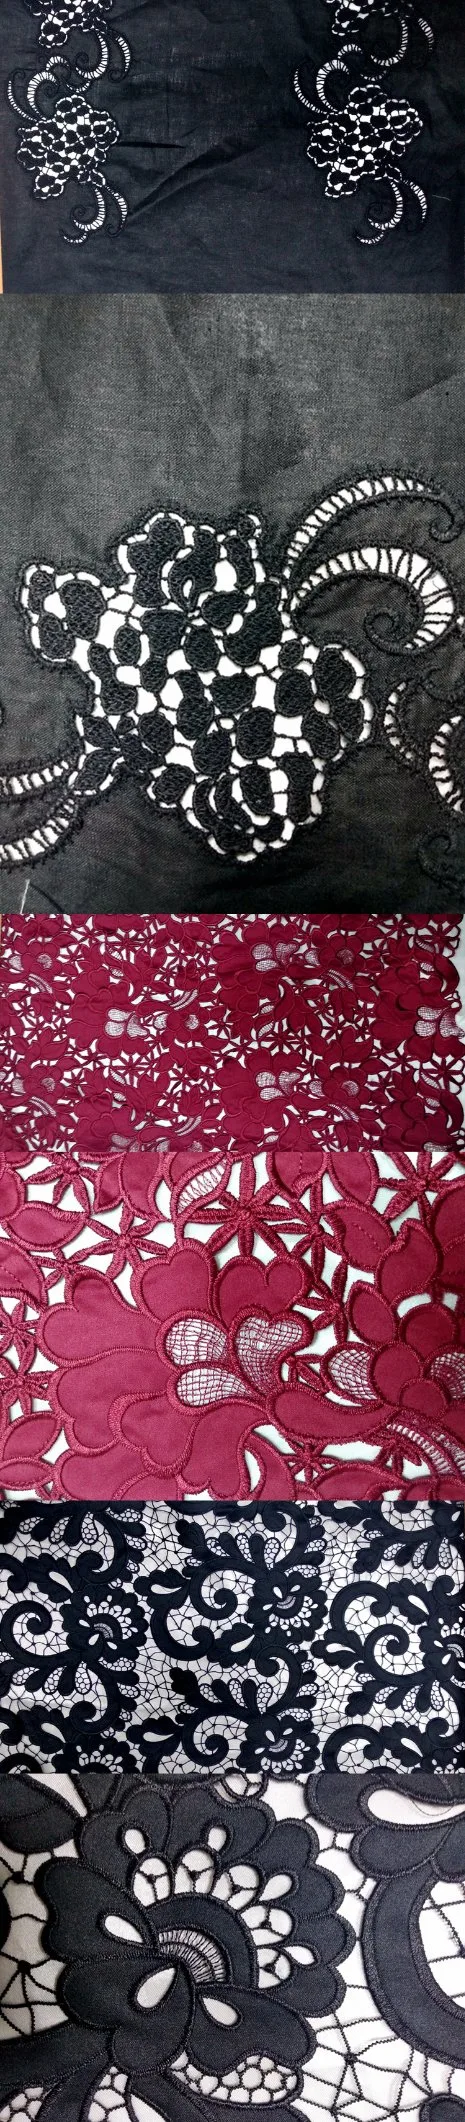 Laser Cut 3D Chemical Lace Embroidery Lace Fabric for Dress